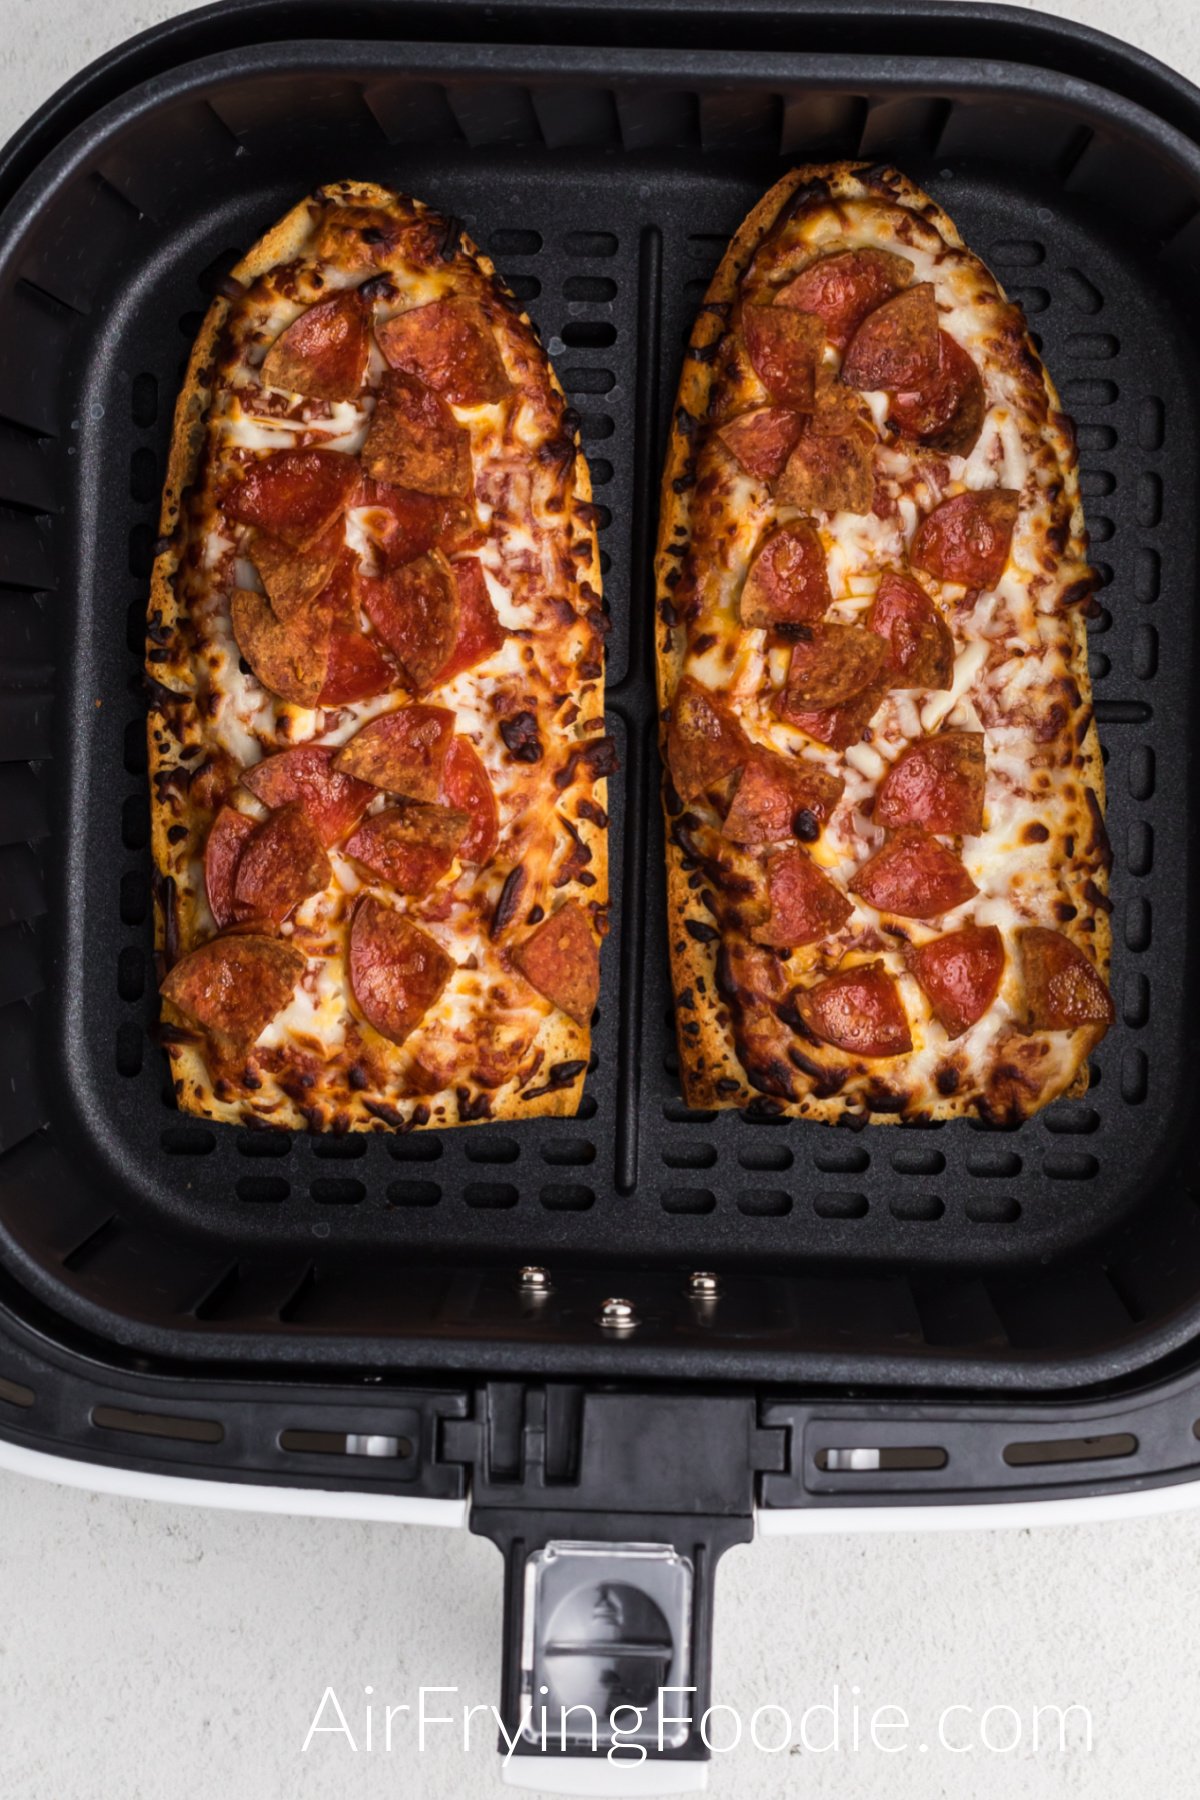 Air fried french bread pizzas in the basket of the air fryer. 